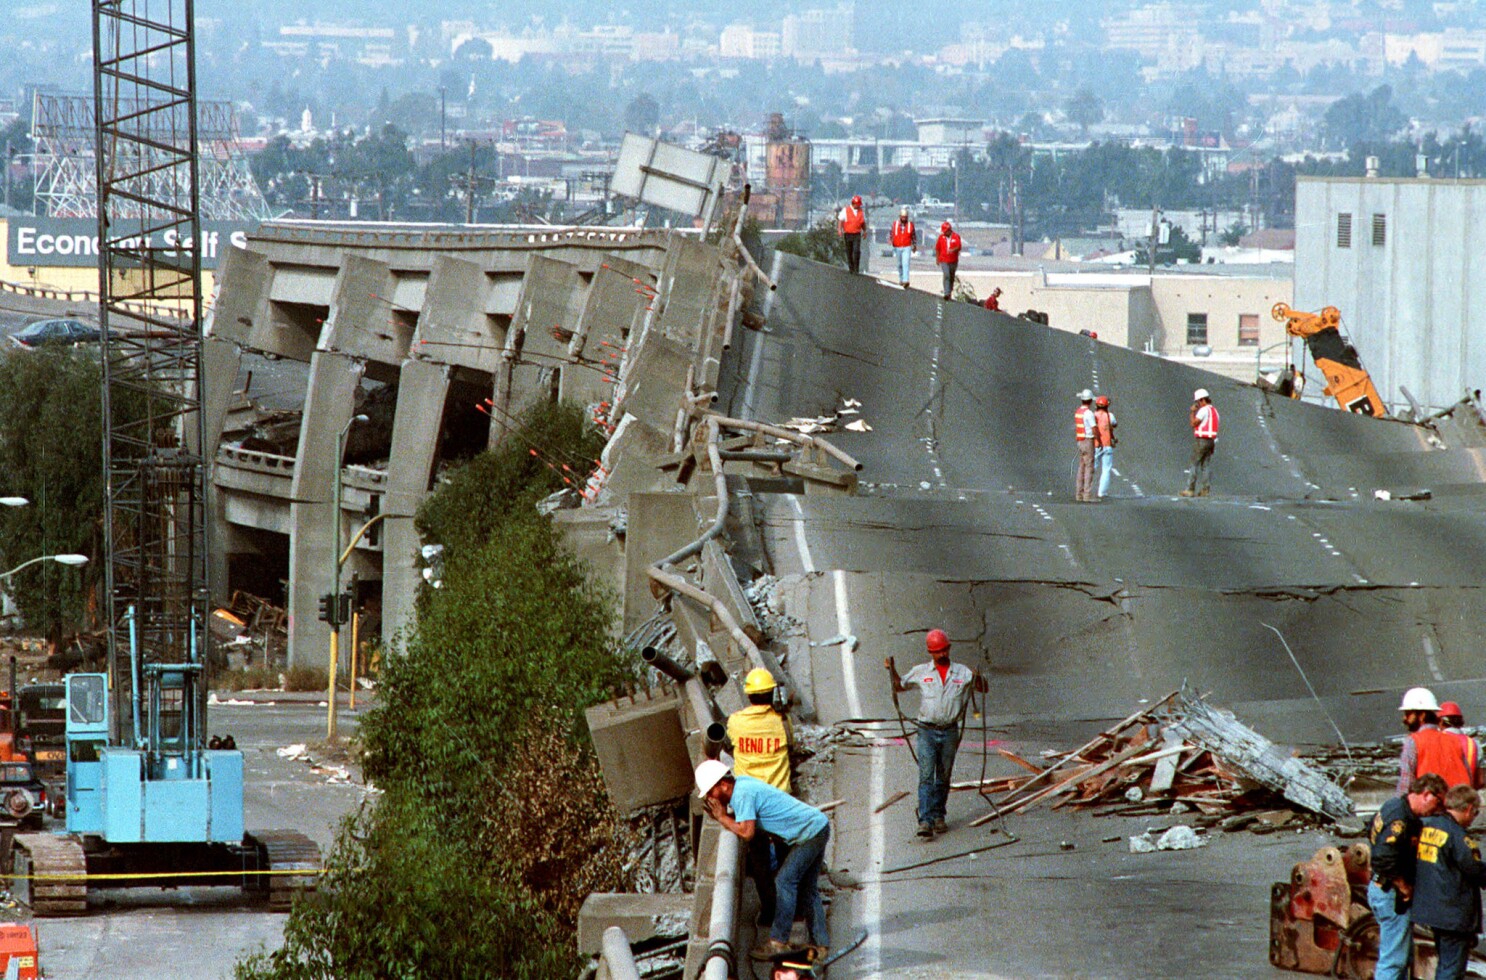 Bay Area Earthquakes Are Latest Warning Of Destructive Seismic